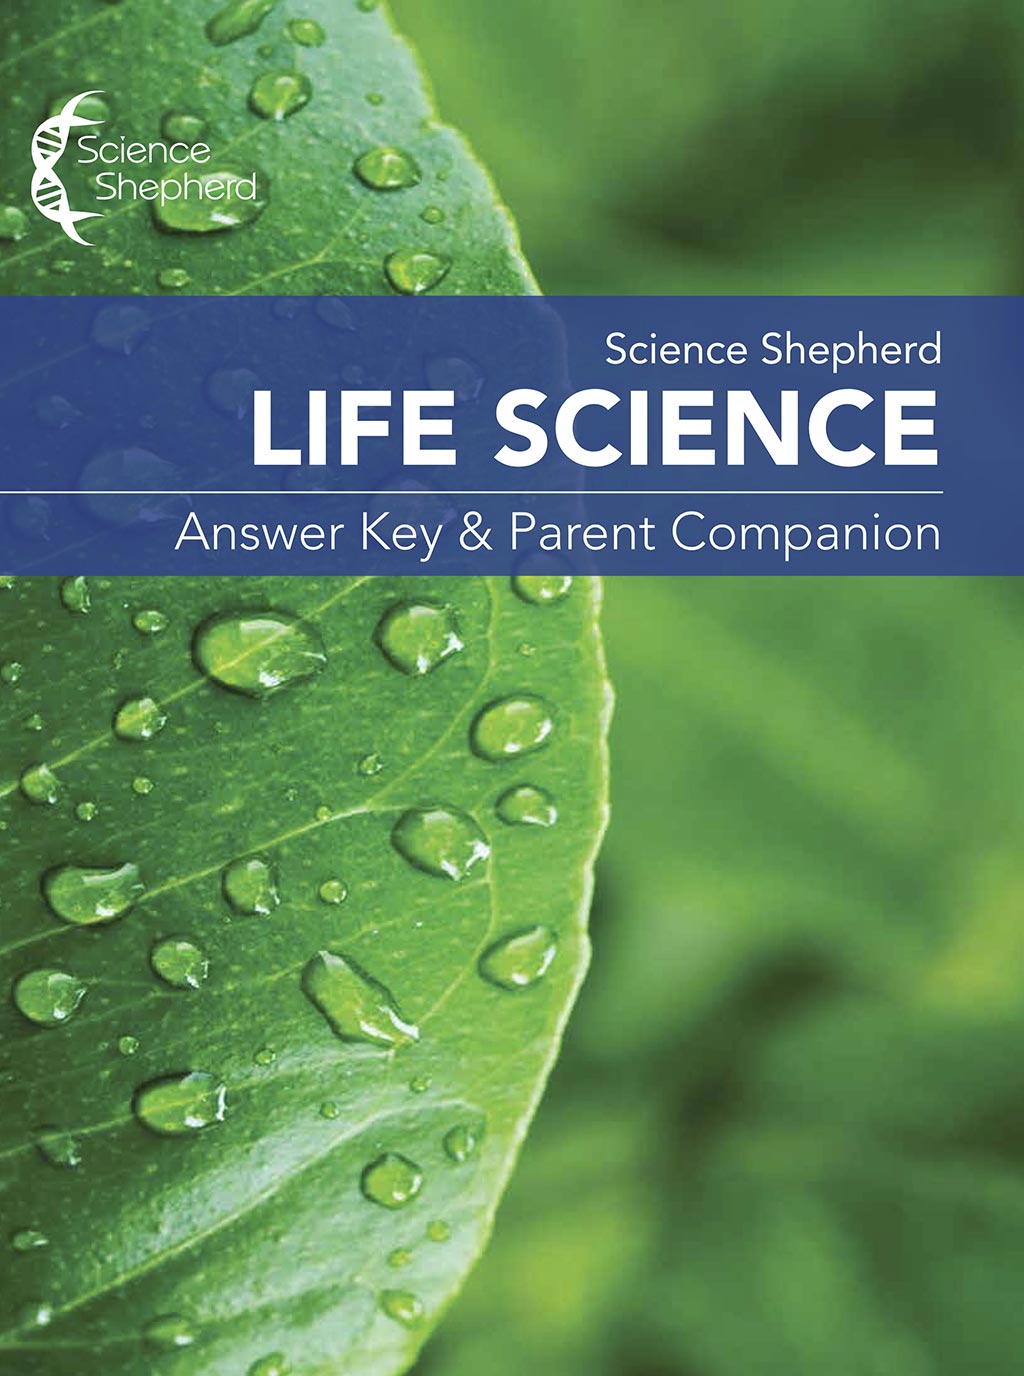 Science Shepherd best homeschool science Answer Key and Parent Companion cover showing a leaf